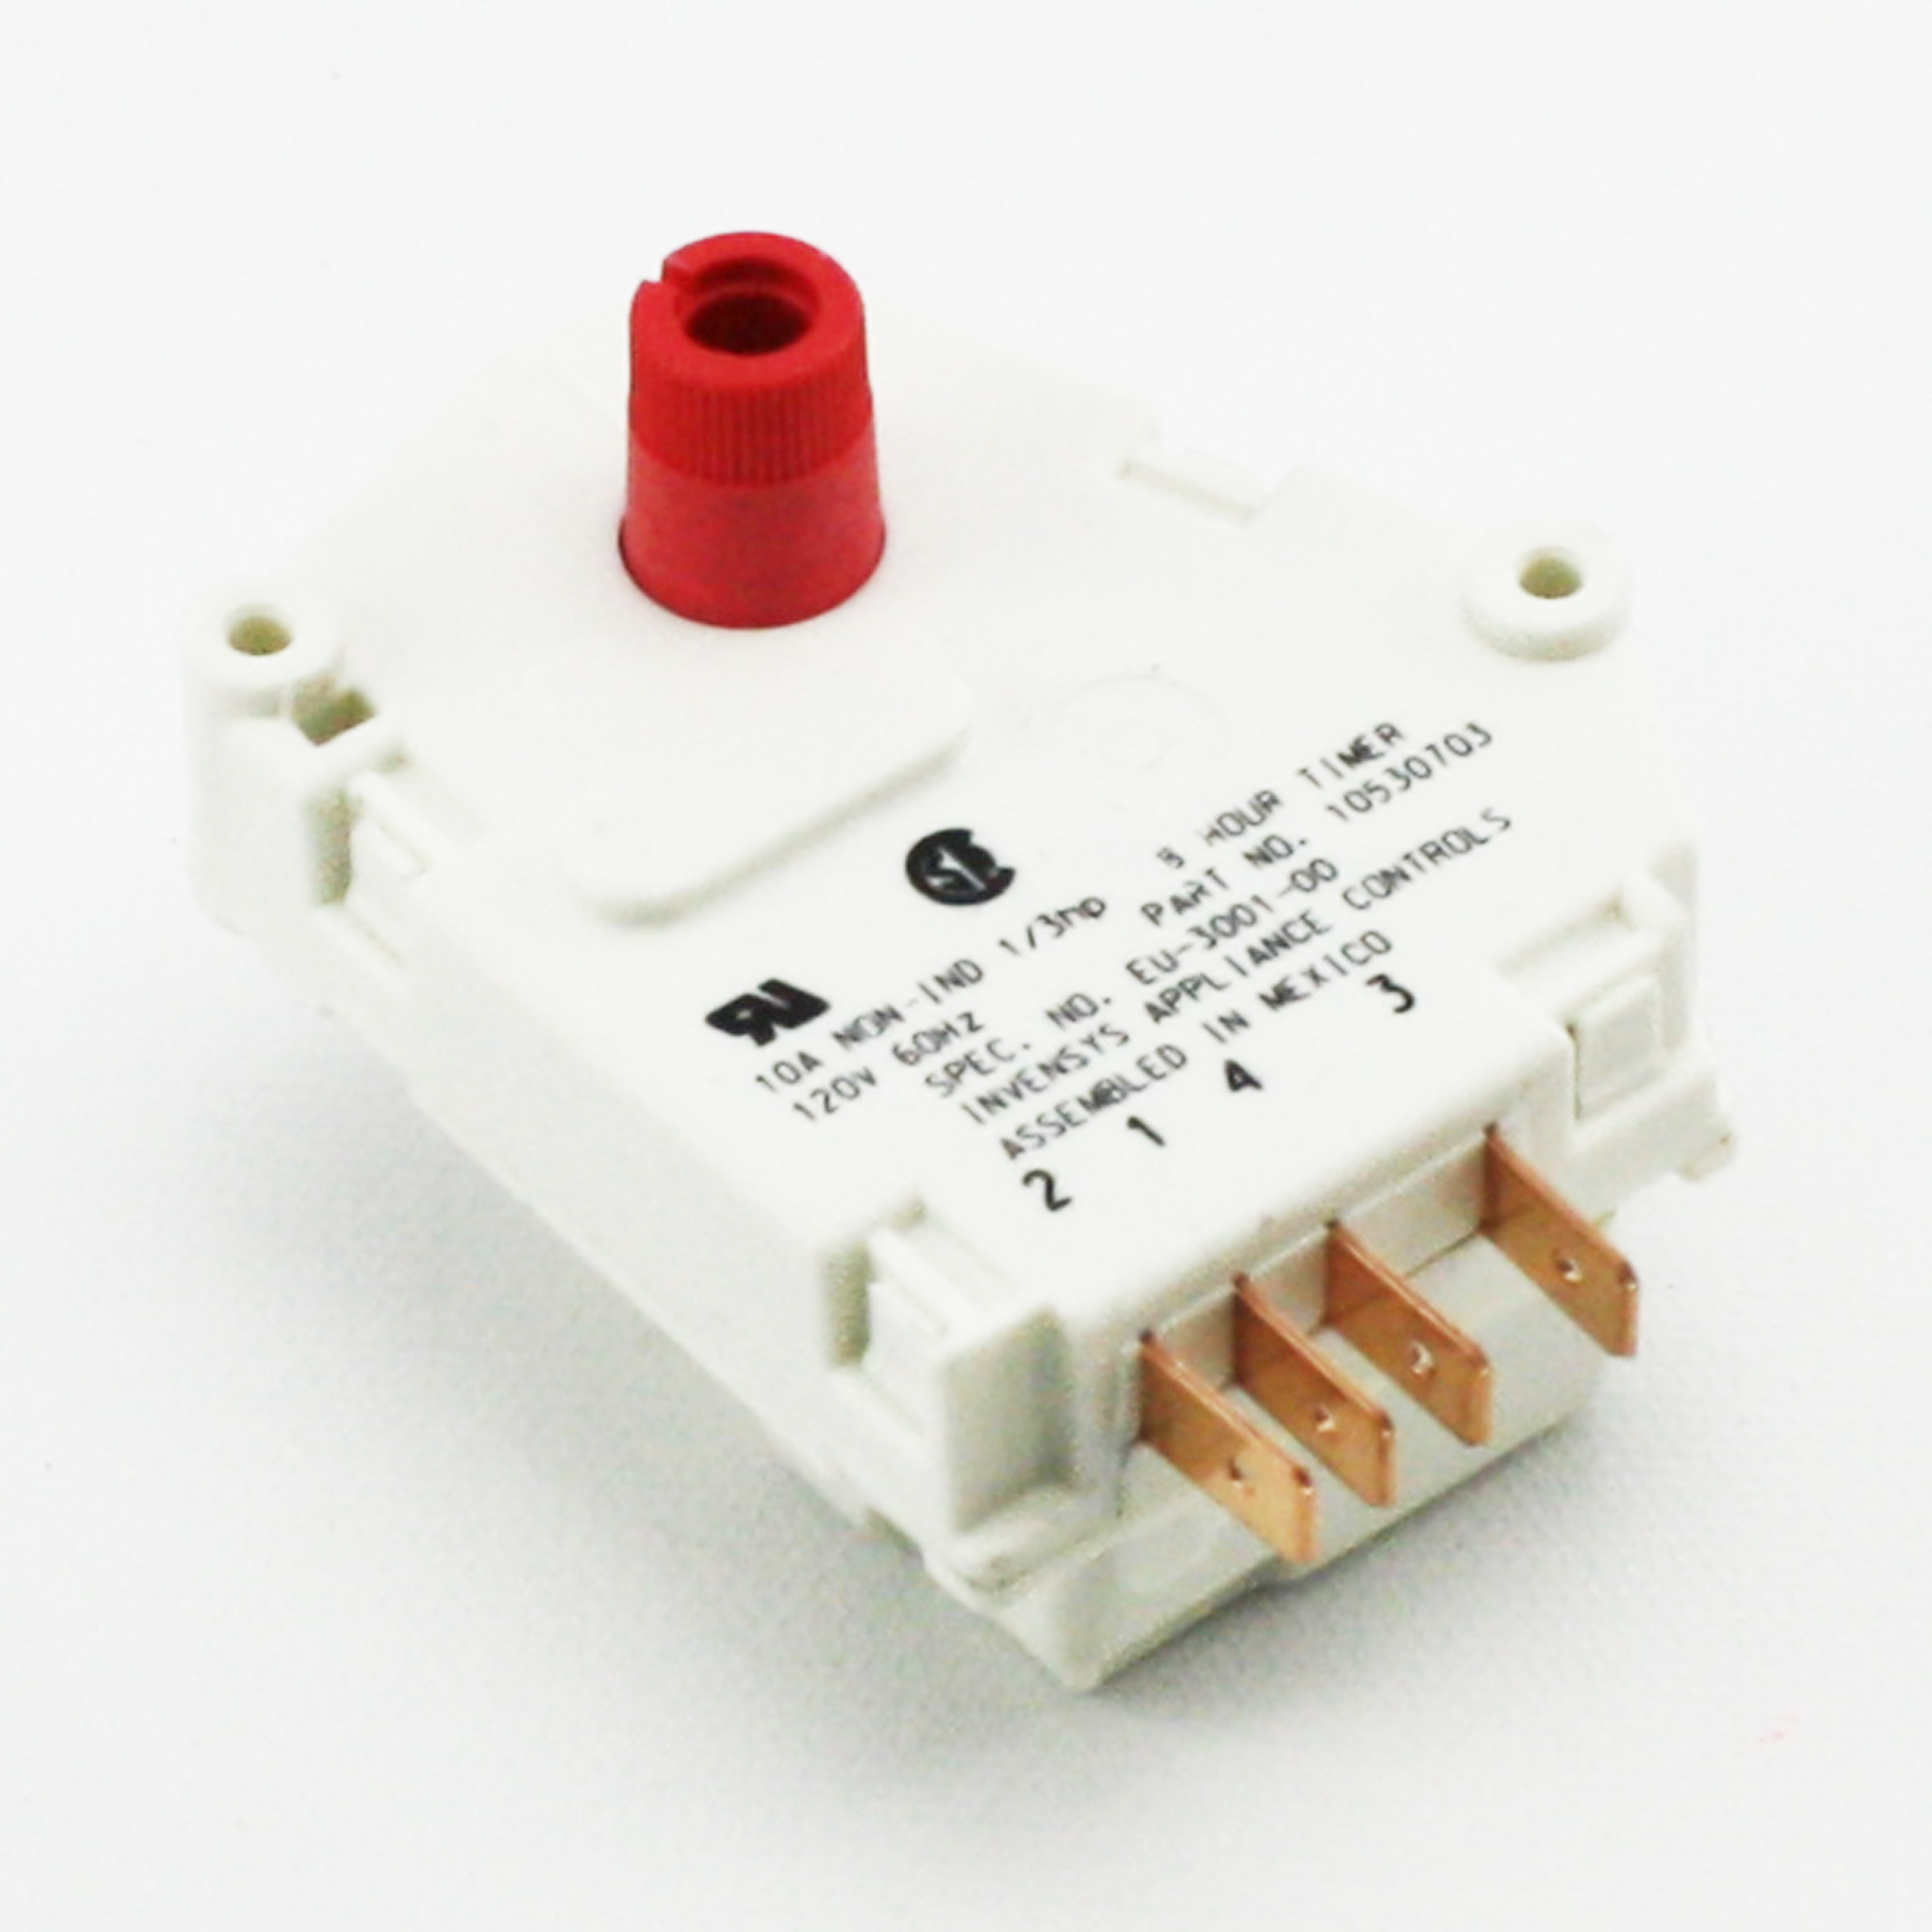 Whirlpool R0131577 Defrost Timer - image 2 of 4